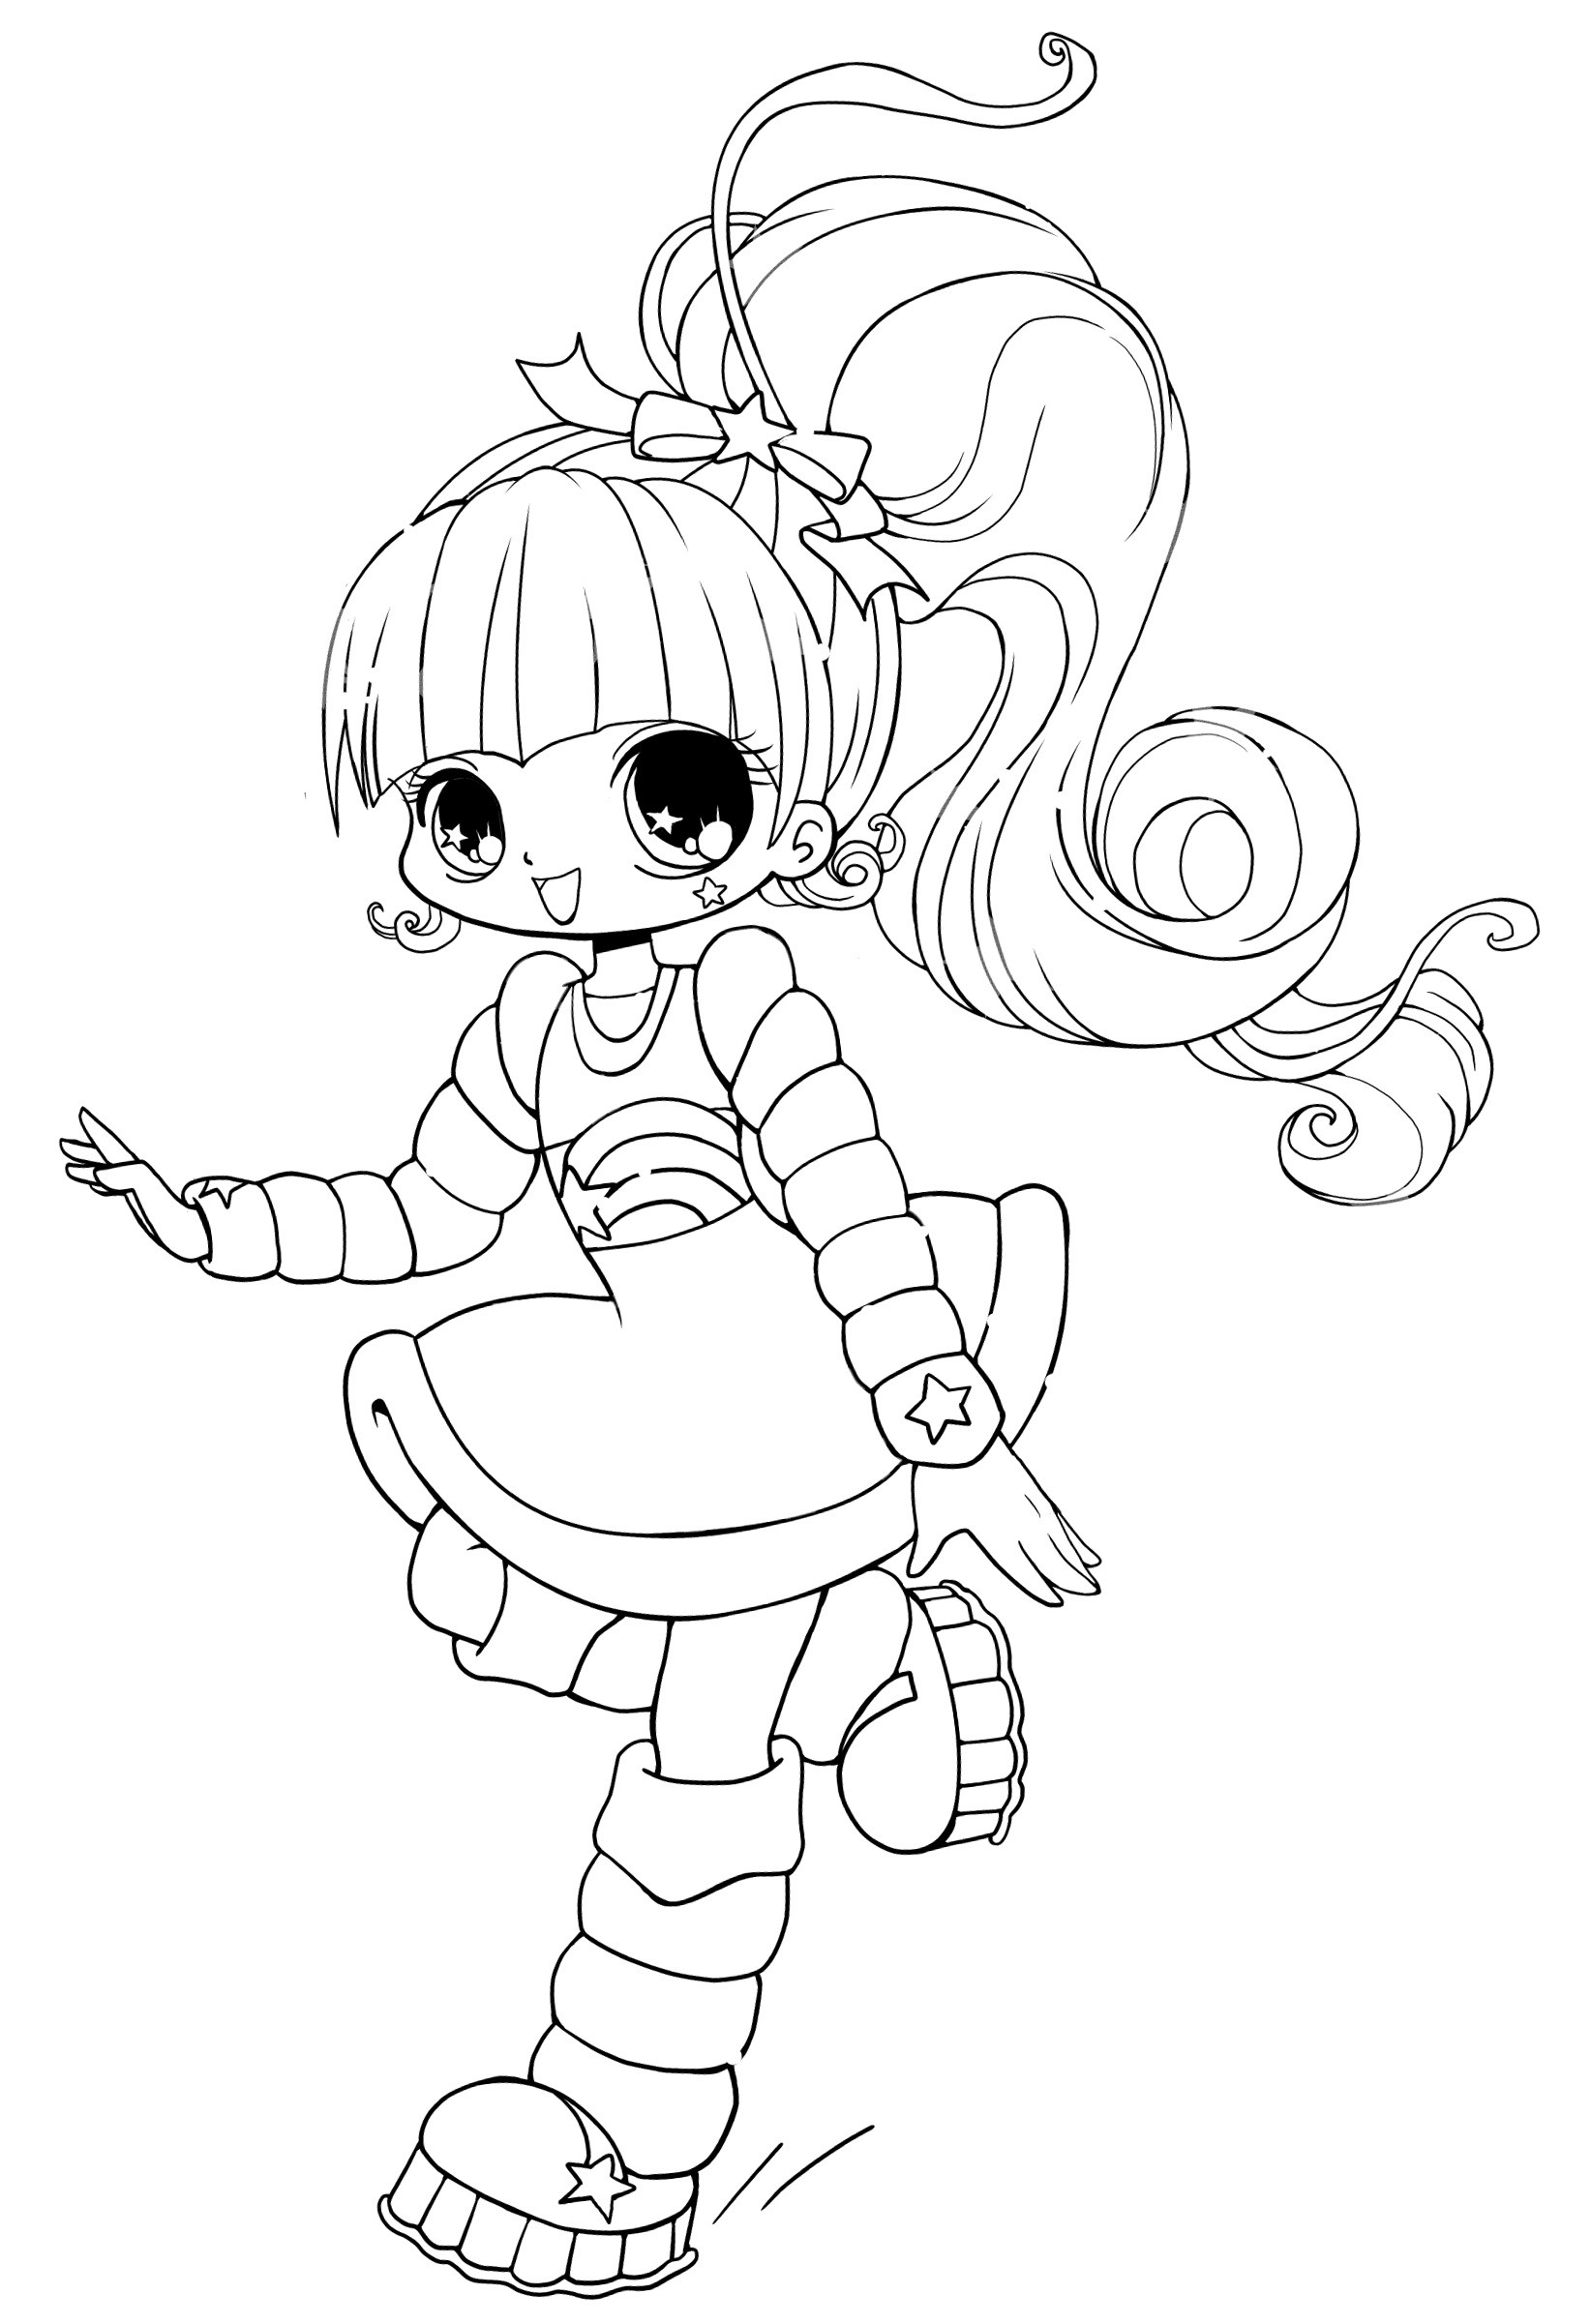 Kawaii Girls Coloring Pages
 1000 images about dessin a colorier 12 on Pinterest